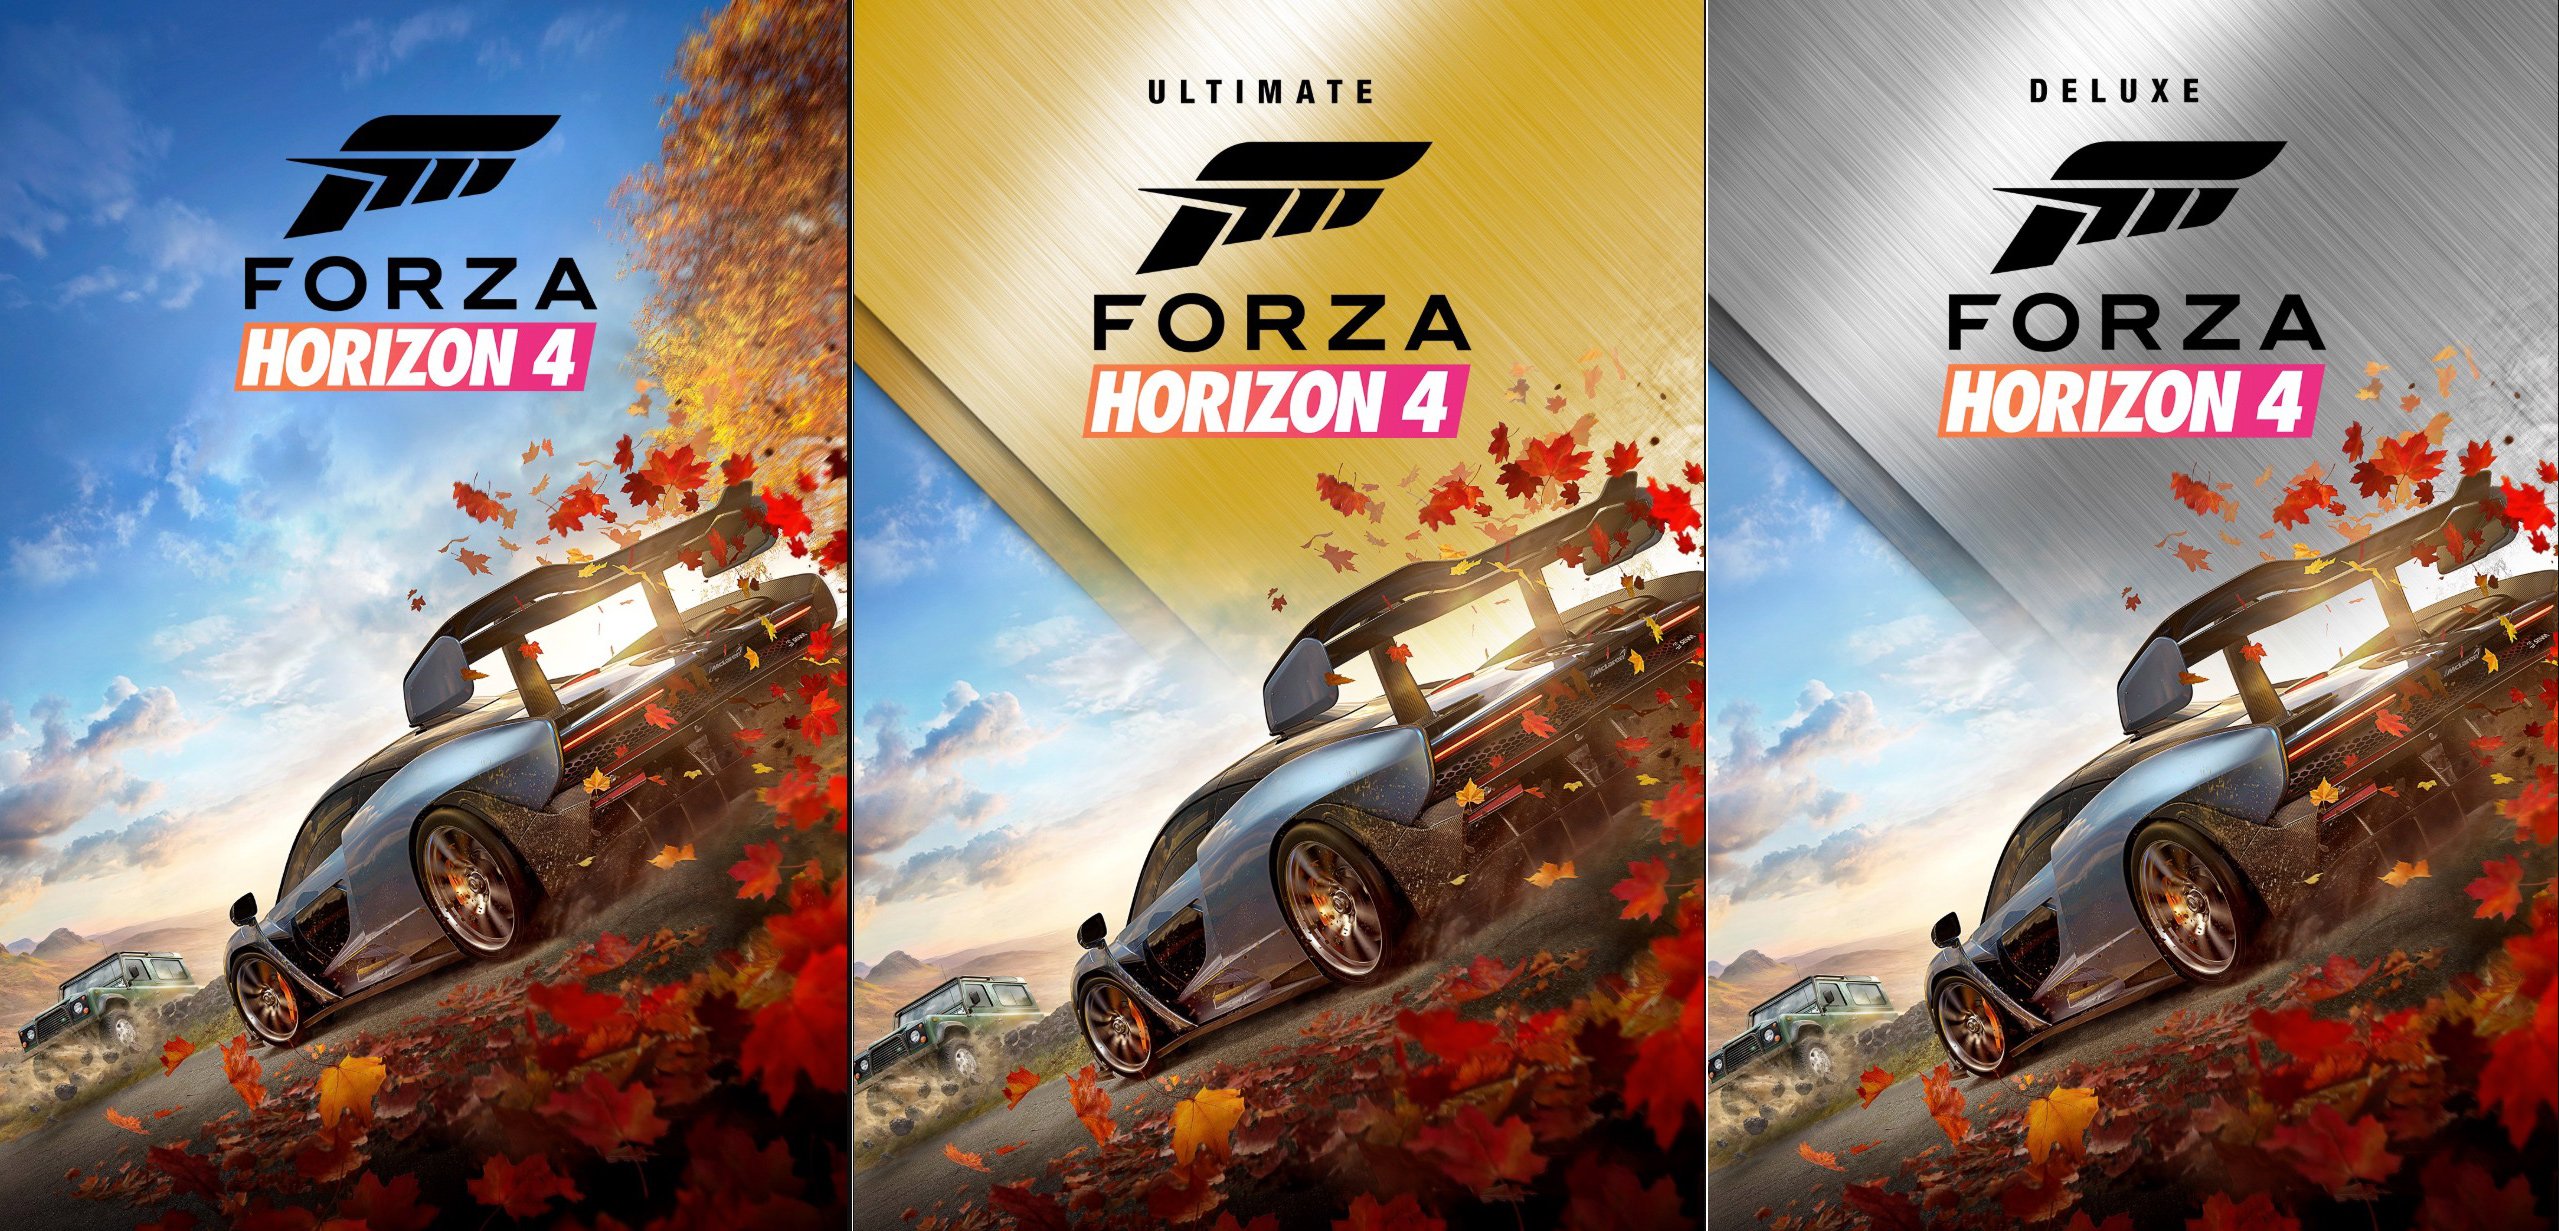 vene tortur Victor Which Forza Horizon 4 Edition Should I Buy?